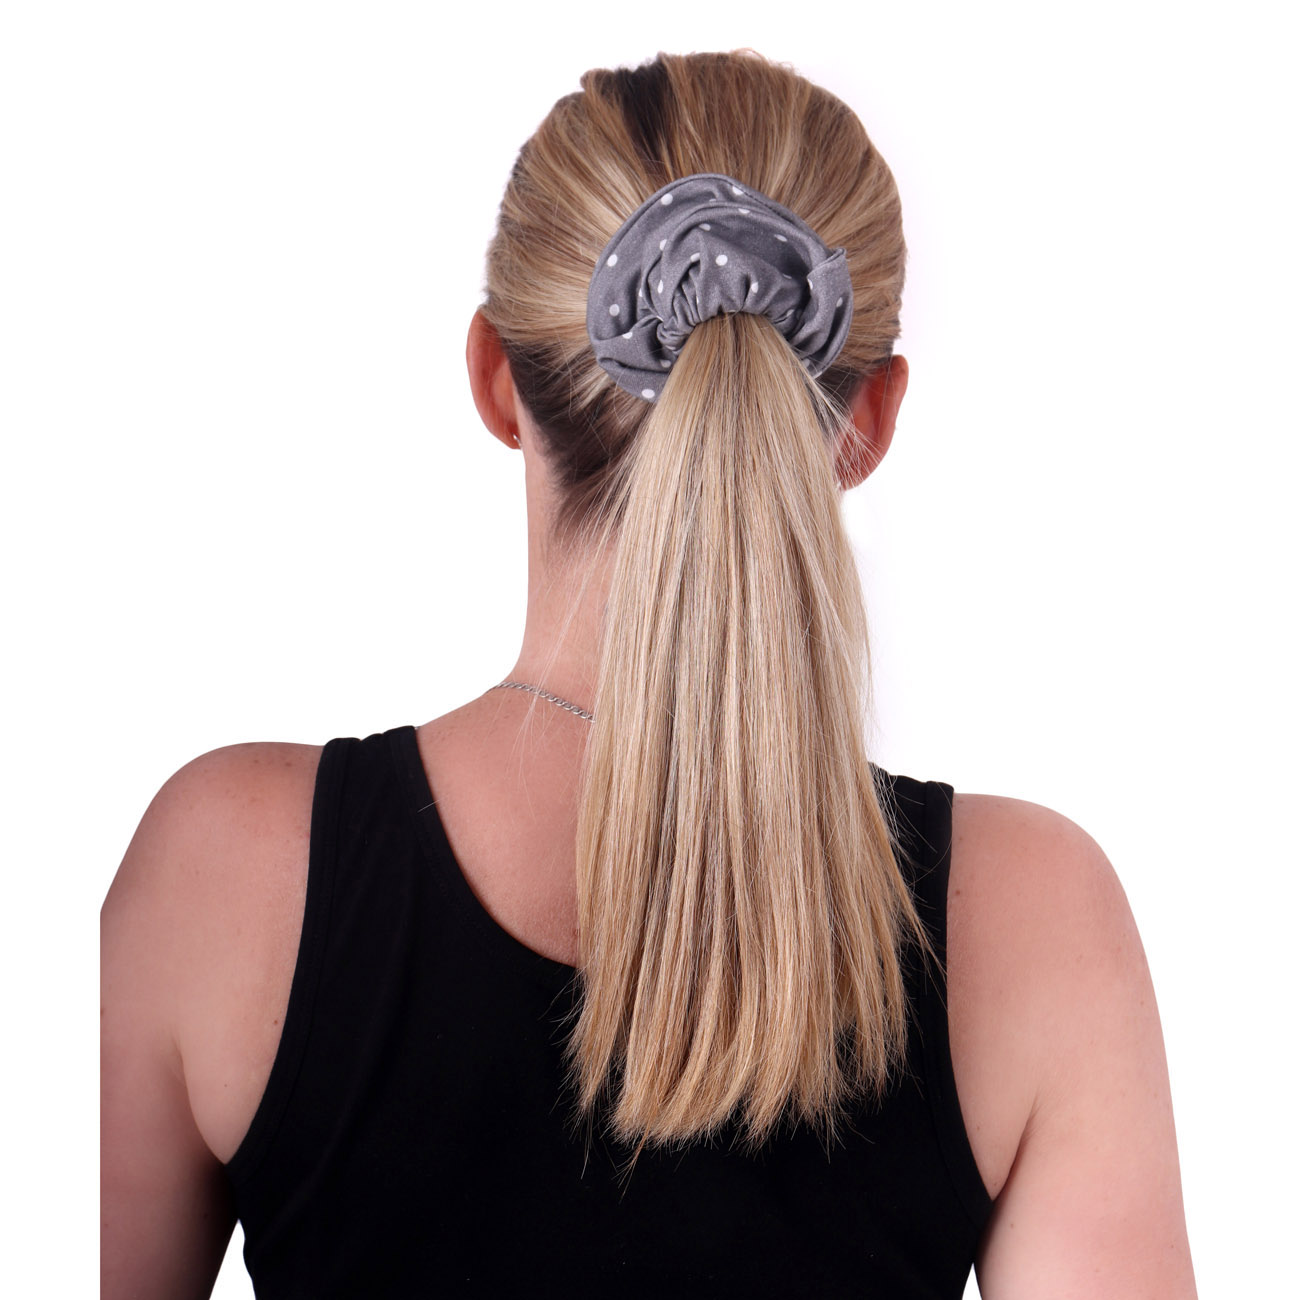 Fabric hair band, big, grey with white dot